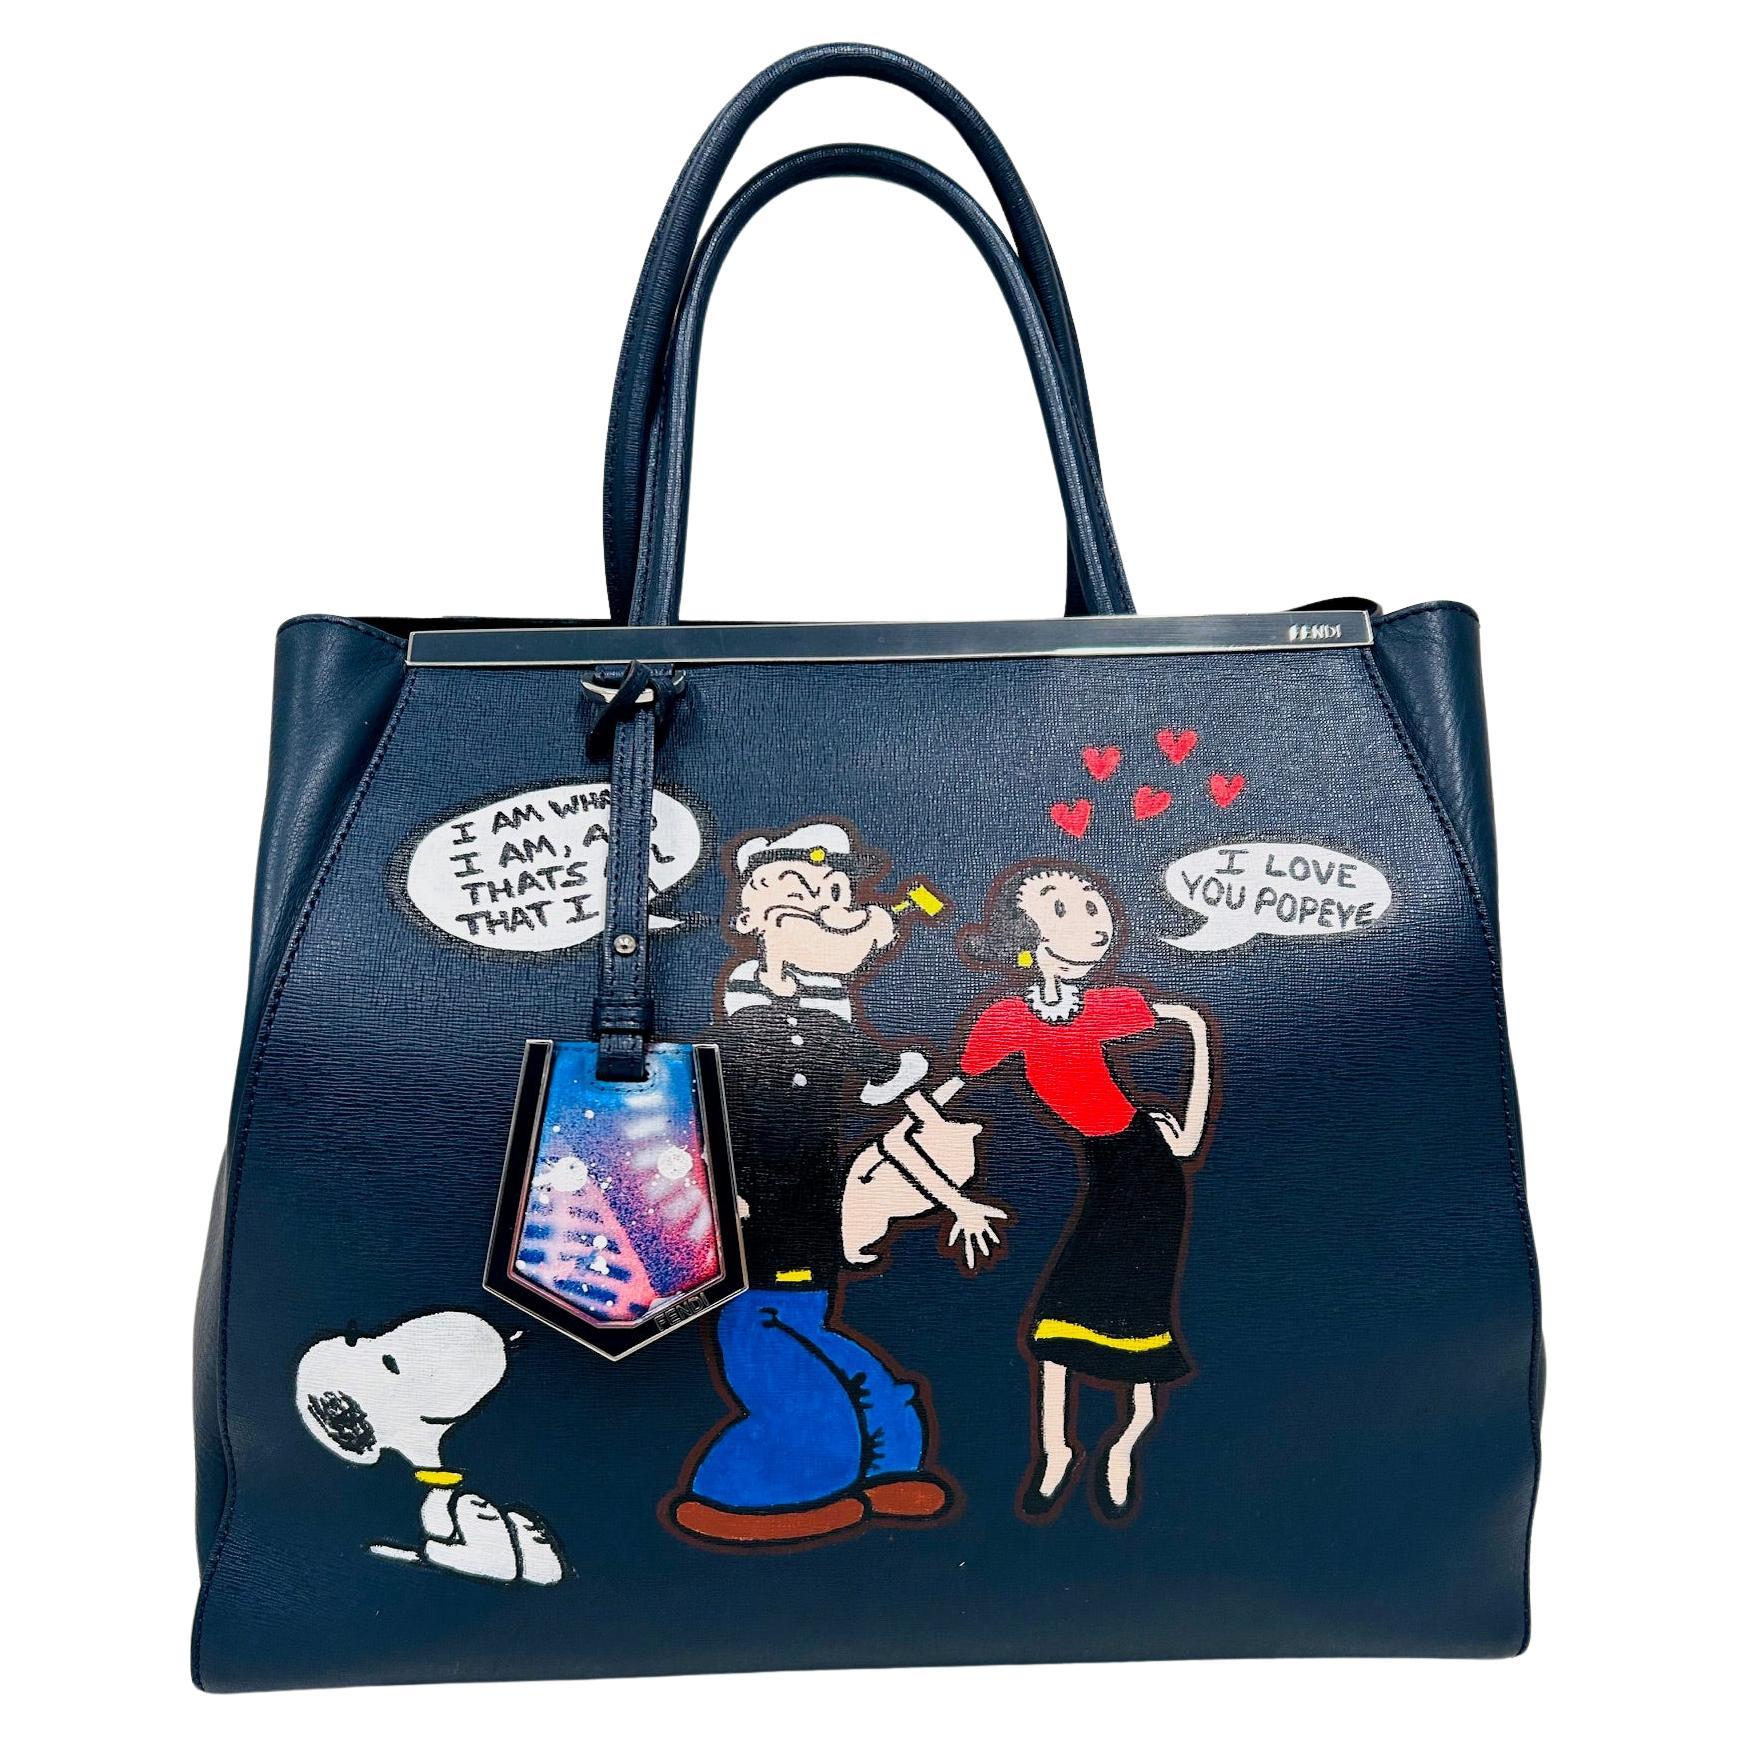 This is a one of a kind custom tote Fendi 2jour in navy blue. 
Textured durable leather on exterior and soft leather on the gussets.
The bag  was hand painted by pop artist Jeremy Wolff on both sides. 
Love the Popeye theme! 
The bag is in excellent